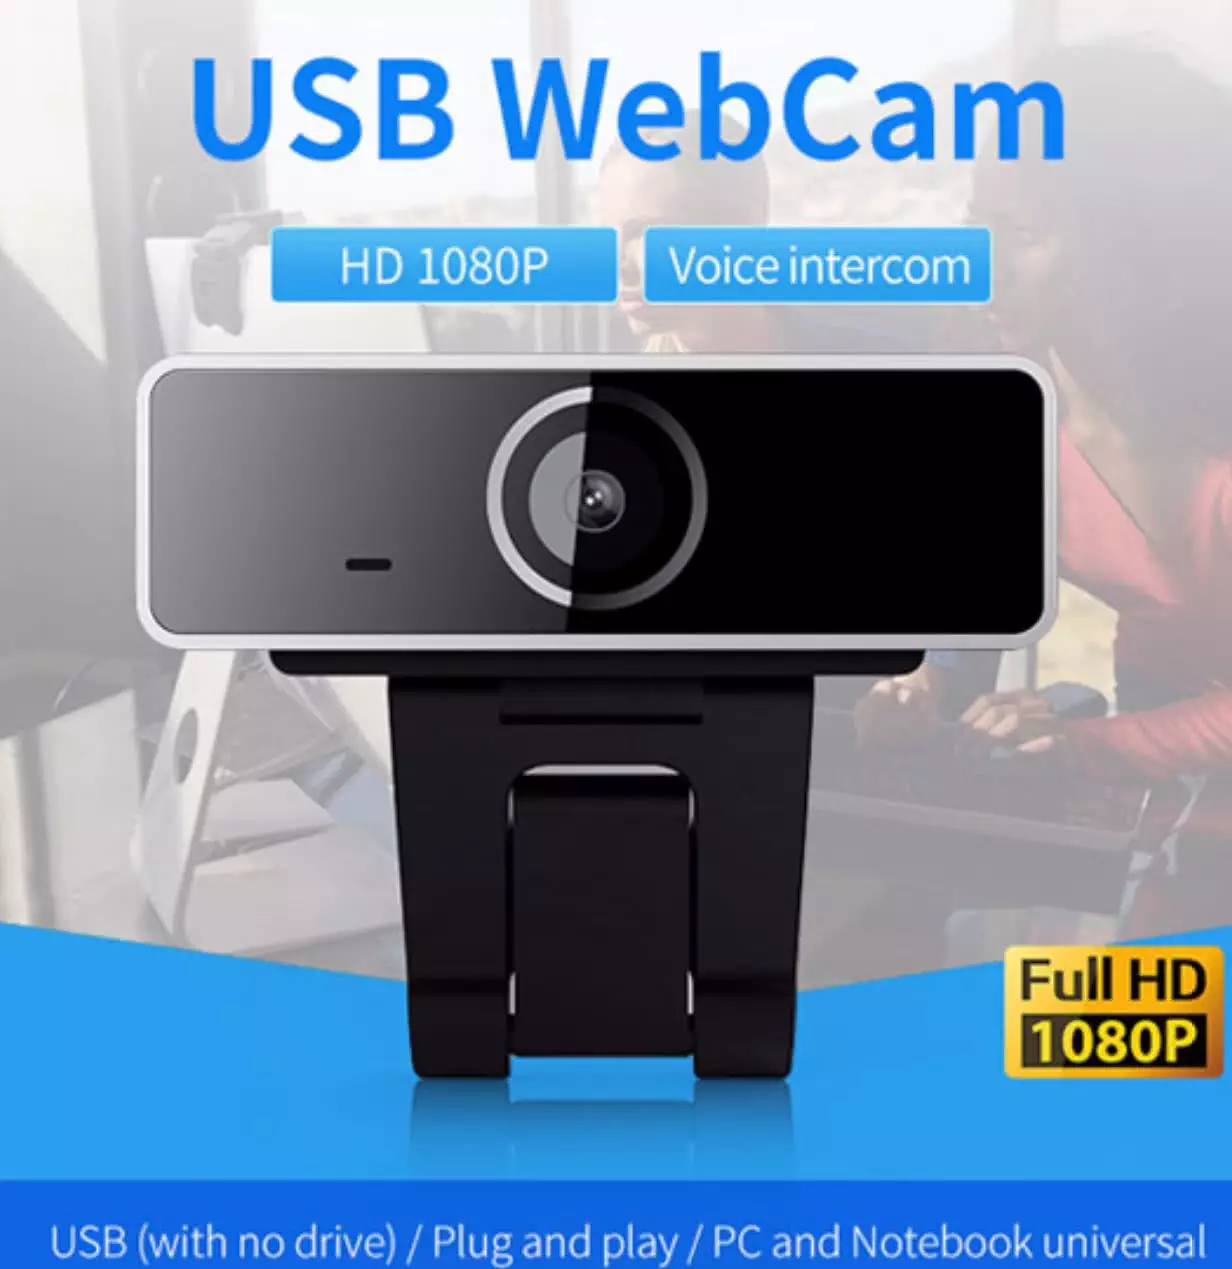 USB 1080p H.264 Full HD Webcam for PC / Notebook with built-in 48dB Microphone | Full HD CMOS Sensor